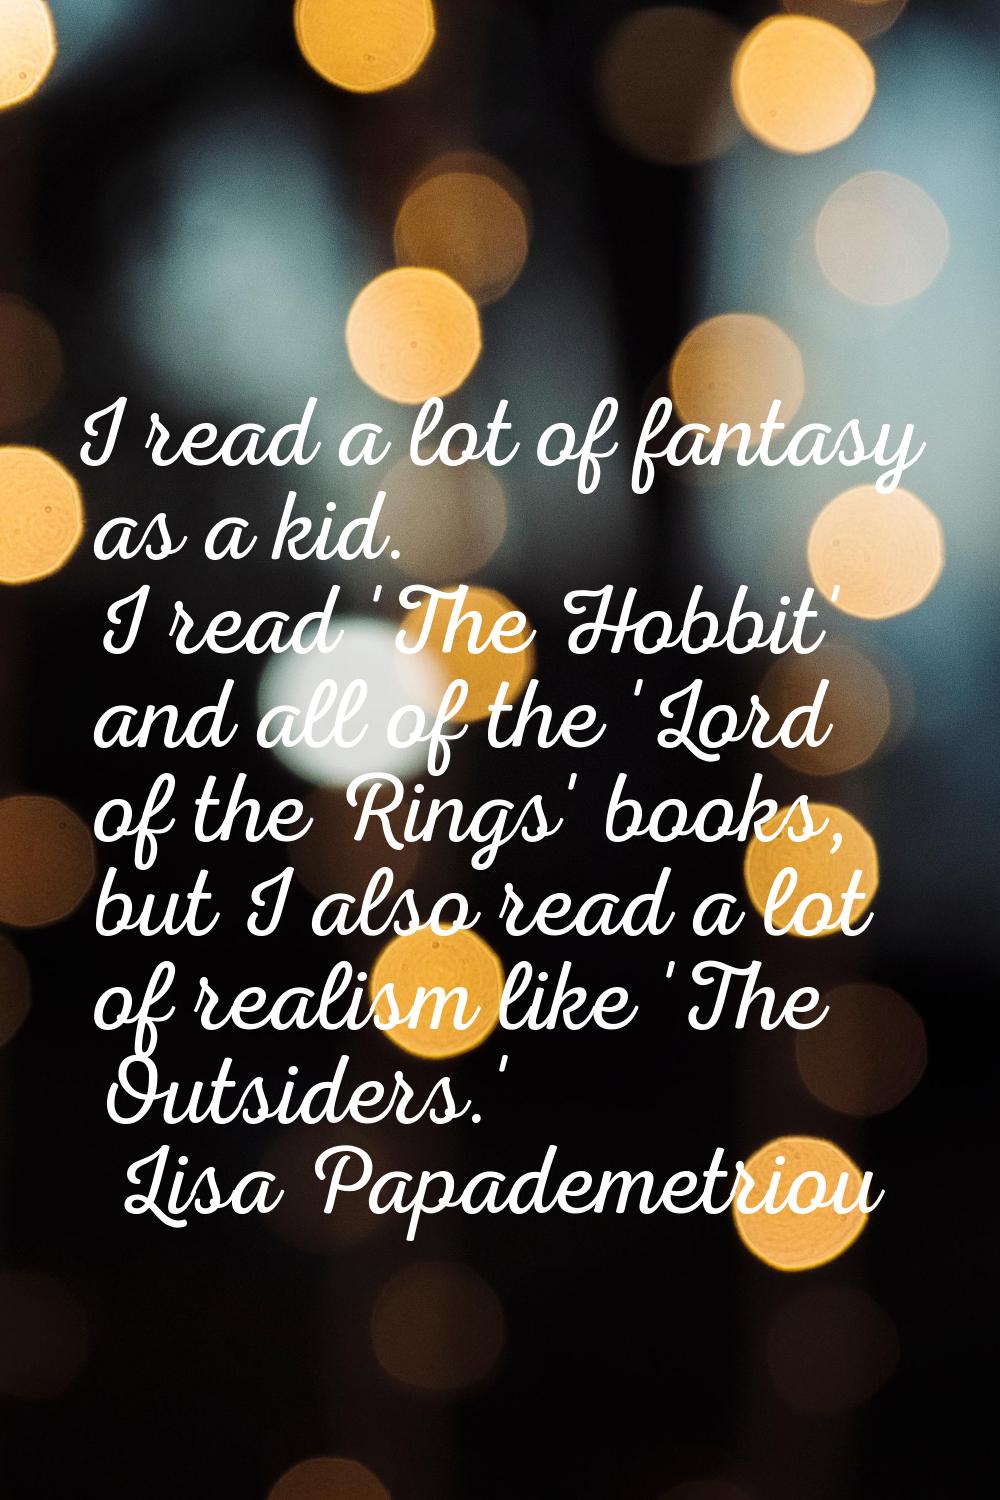 I read a lot of fantasy as a kid. I read 'The Hobbit' and all of the 'Lord of the Rings' books, but